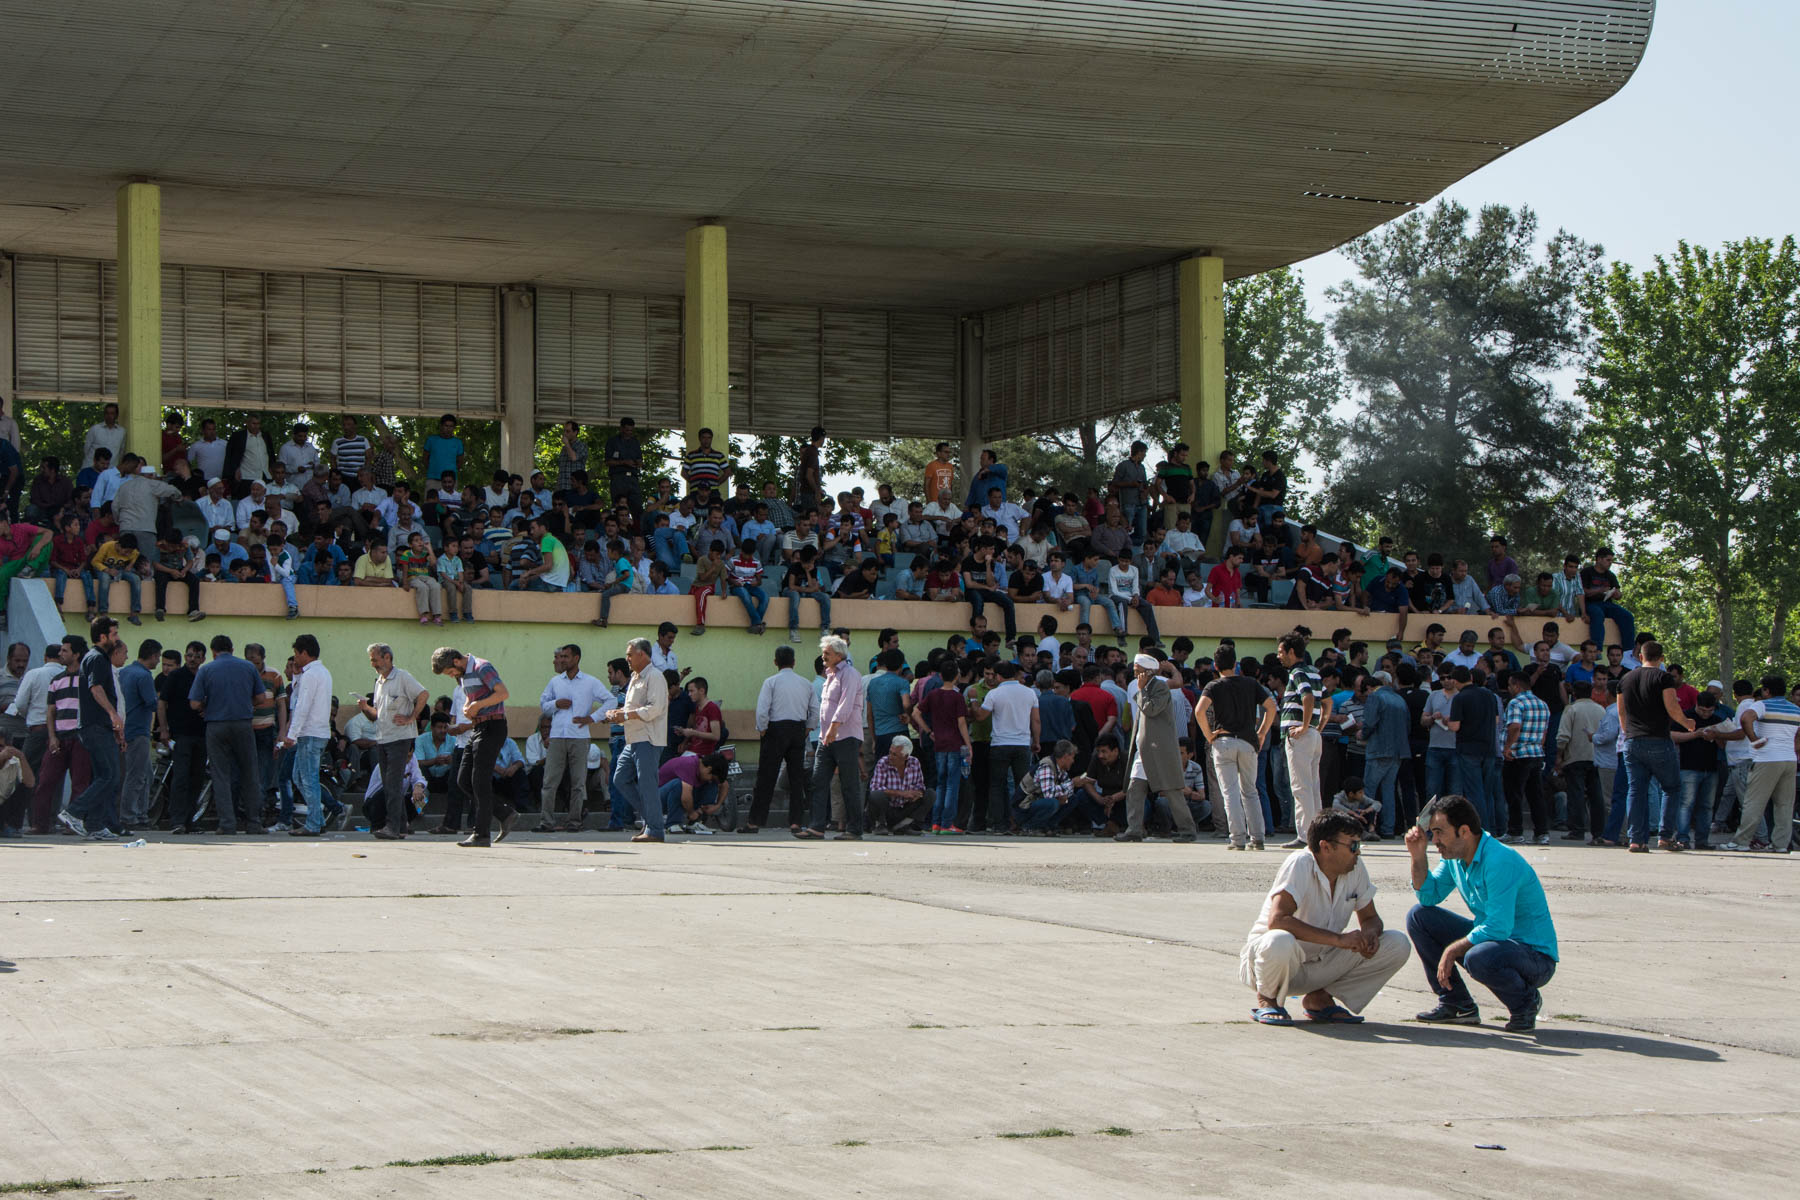 Men hiding in the shade at the horse races in Gonbad-e Kavus, Iran.